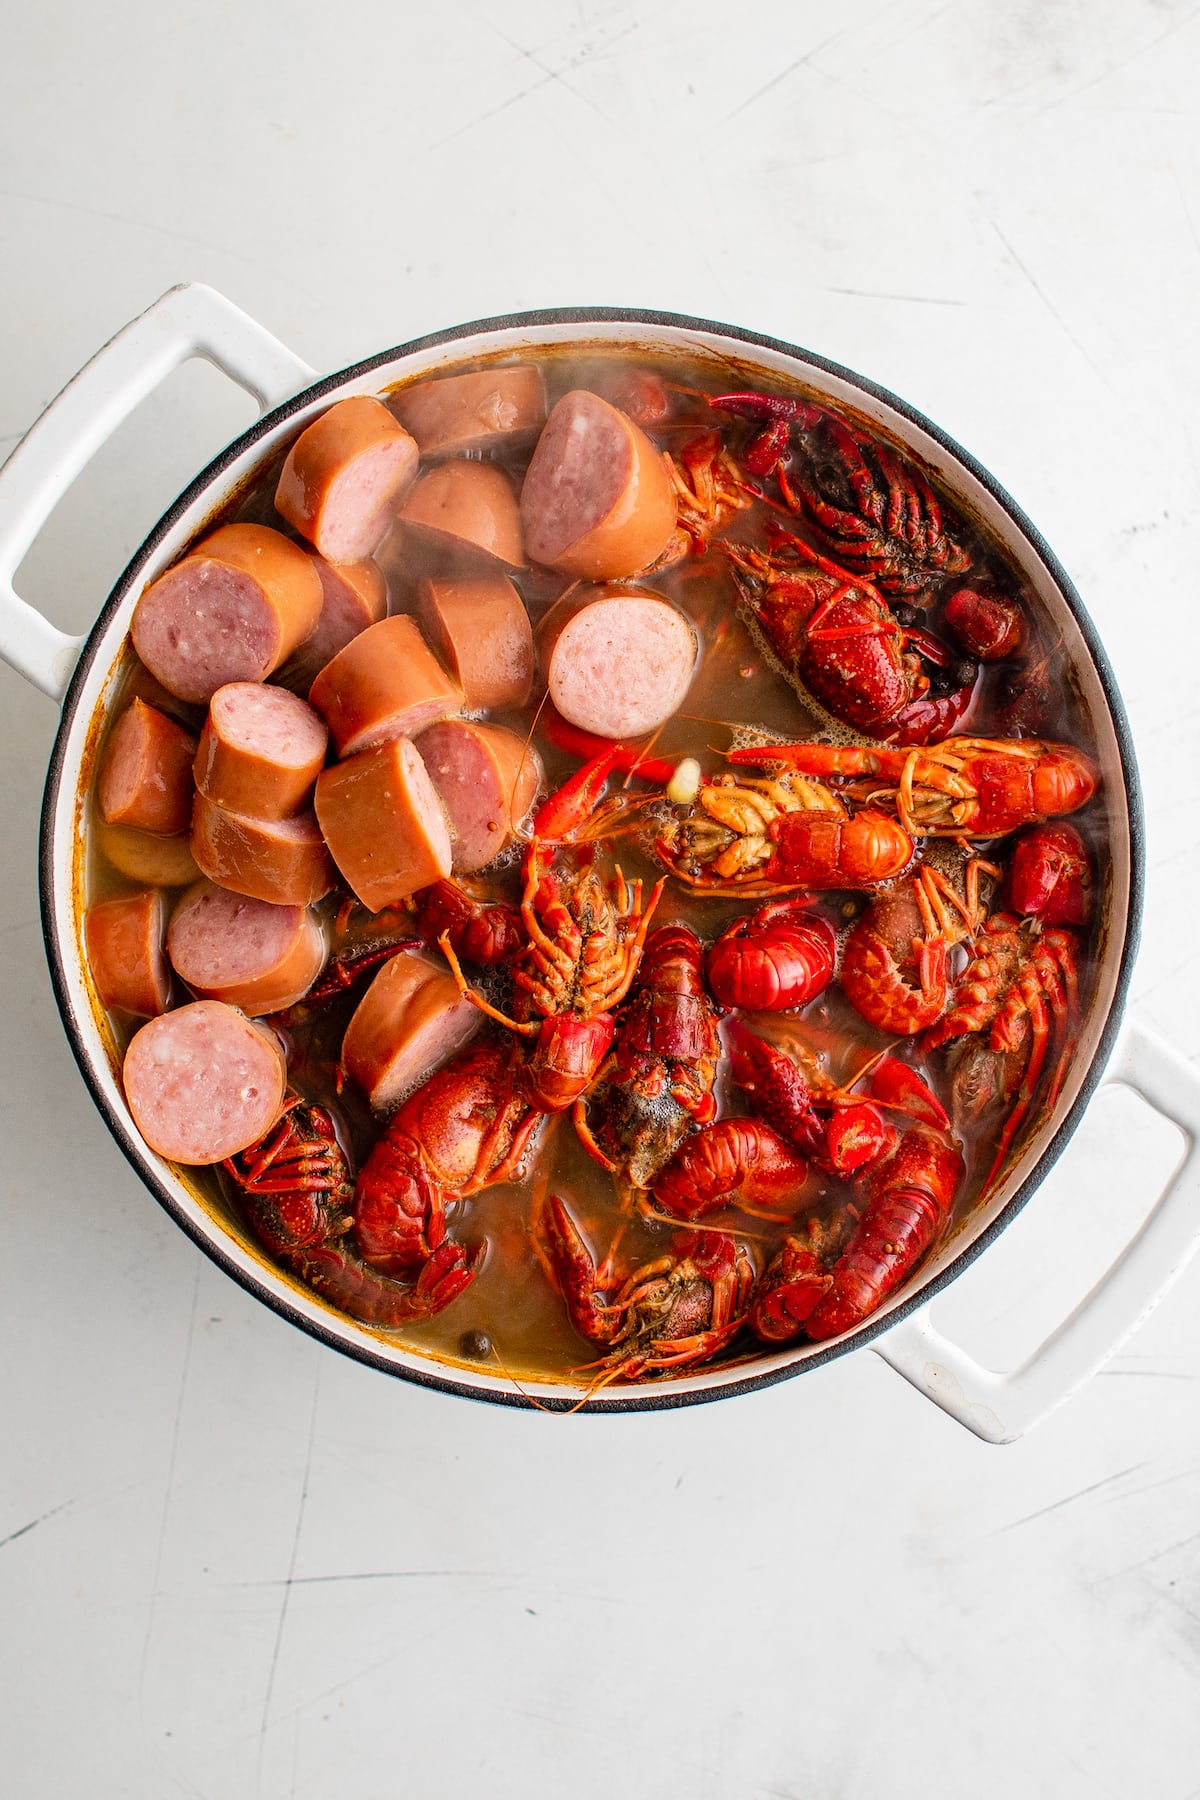 Crawfish and sausage in a pot with broth.